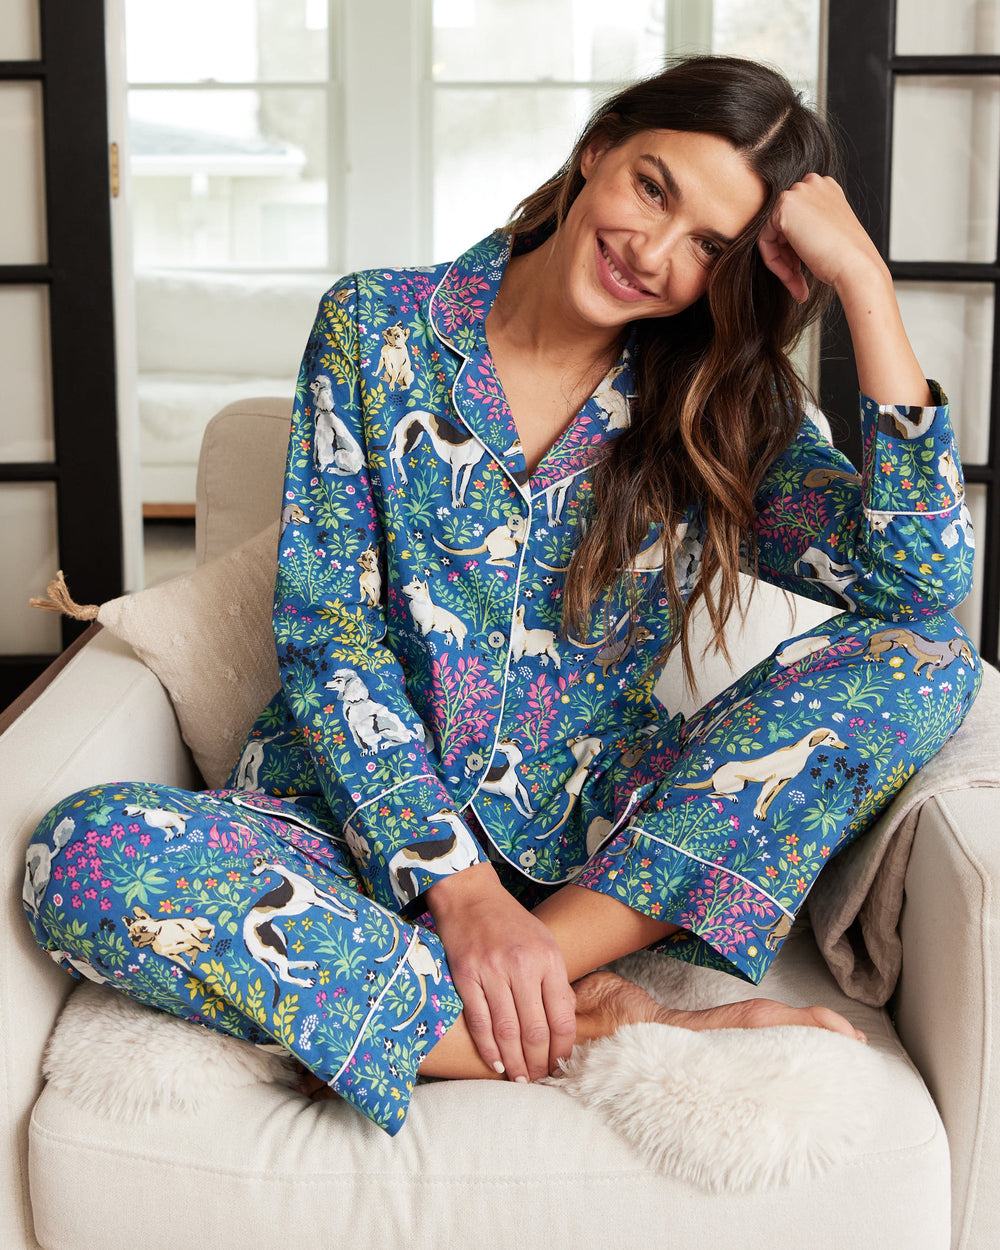 Classic PJ Set in Candy Cane – Marine Layer